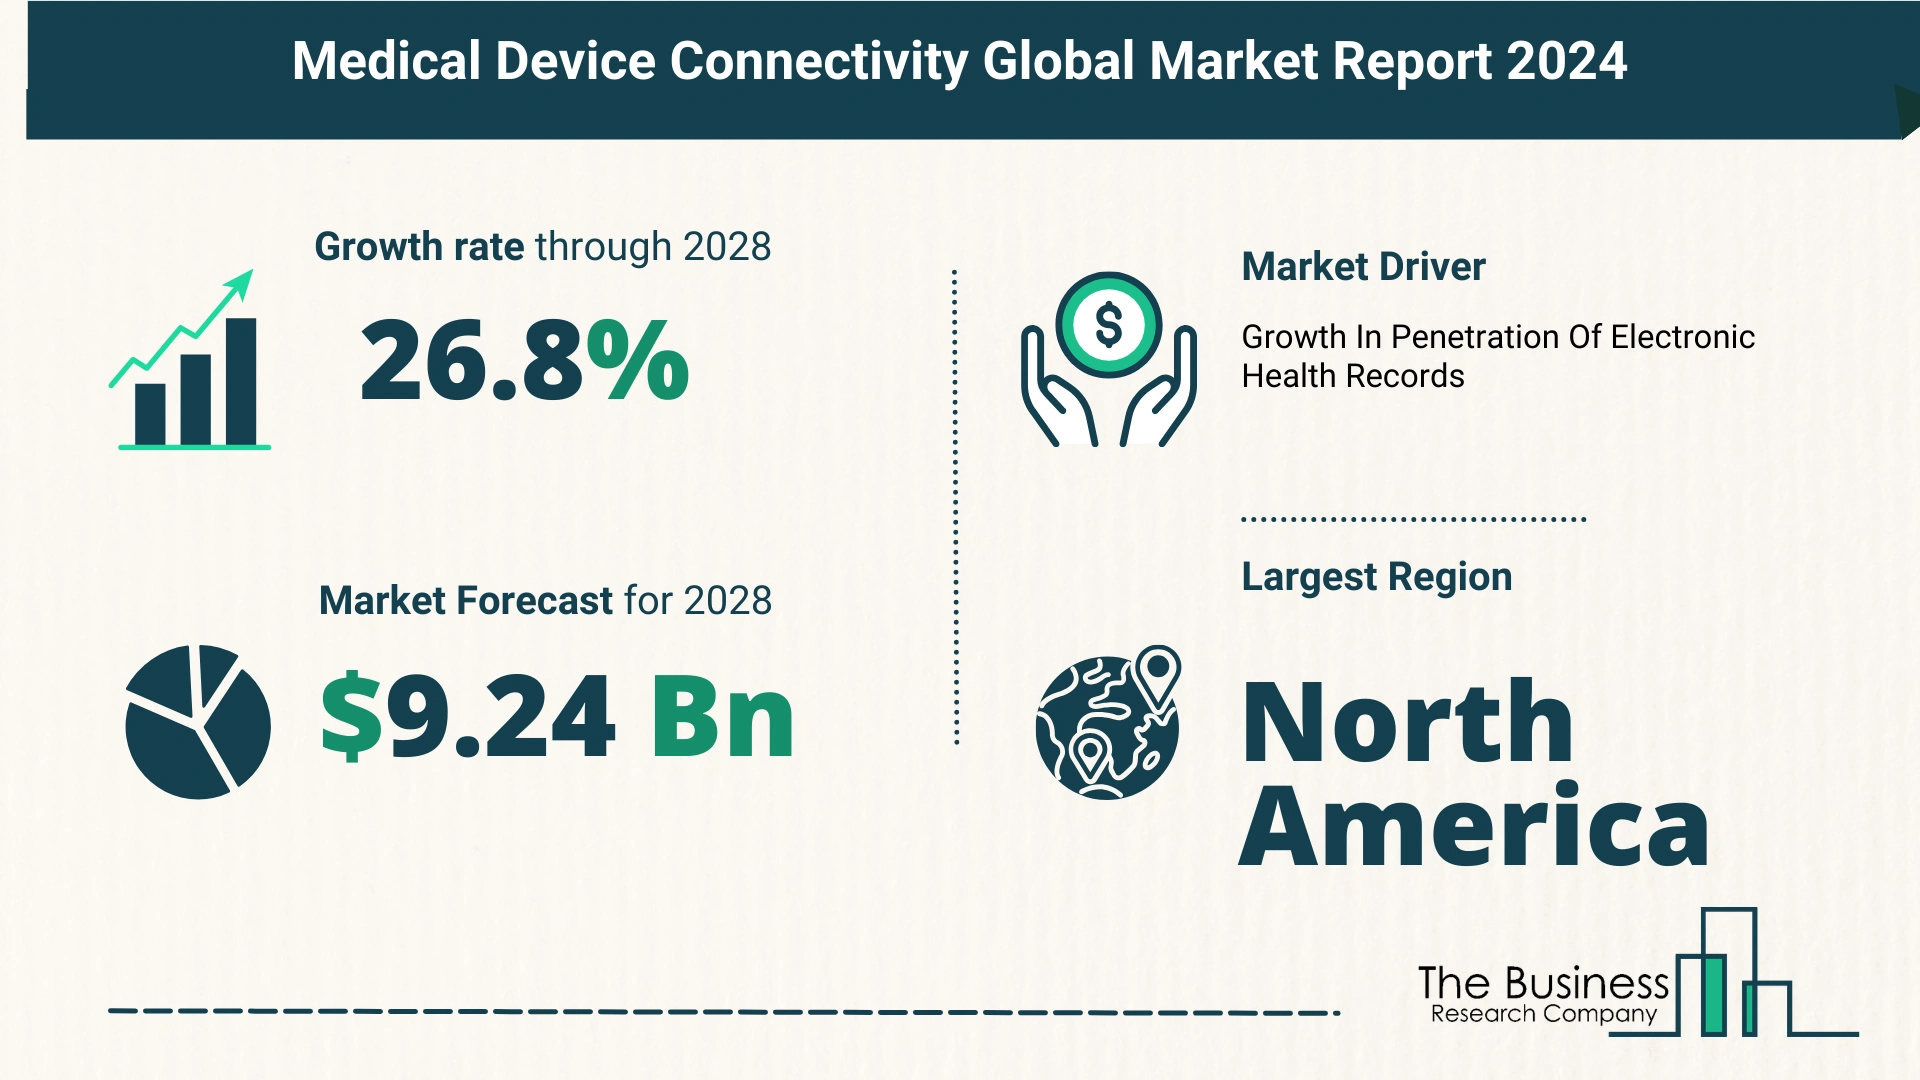 Medical Device Connectivity Market Forecast Until 2033 – Estimated Market Size And Growth Rate